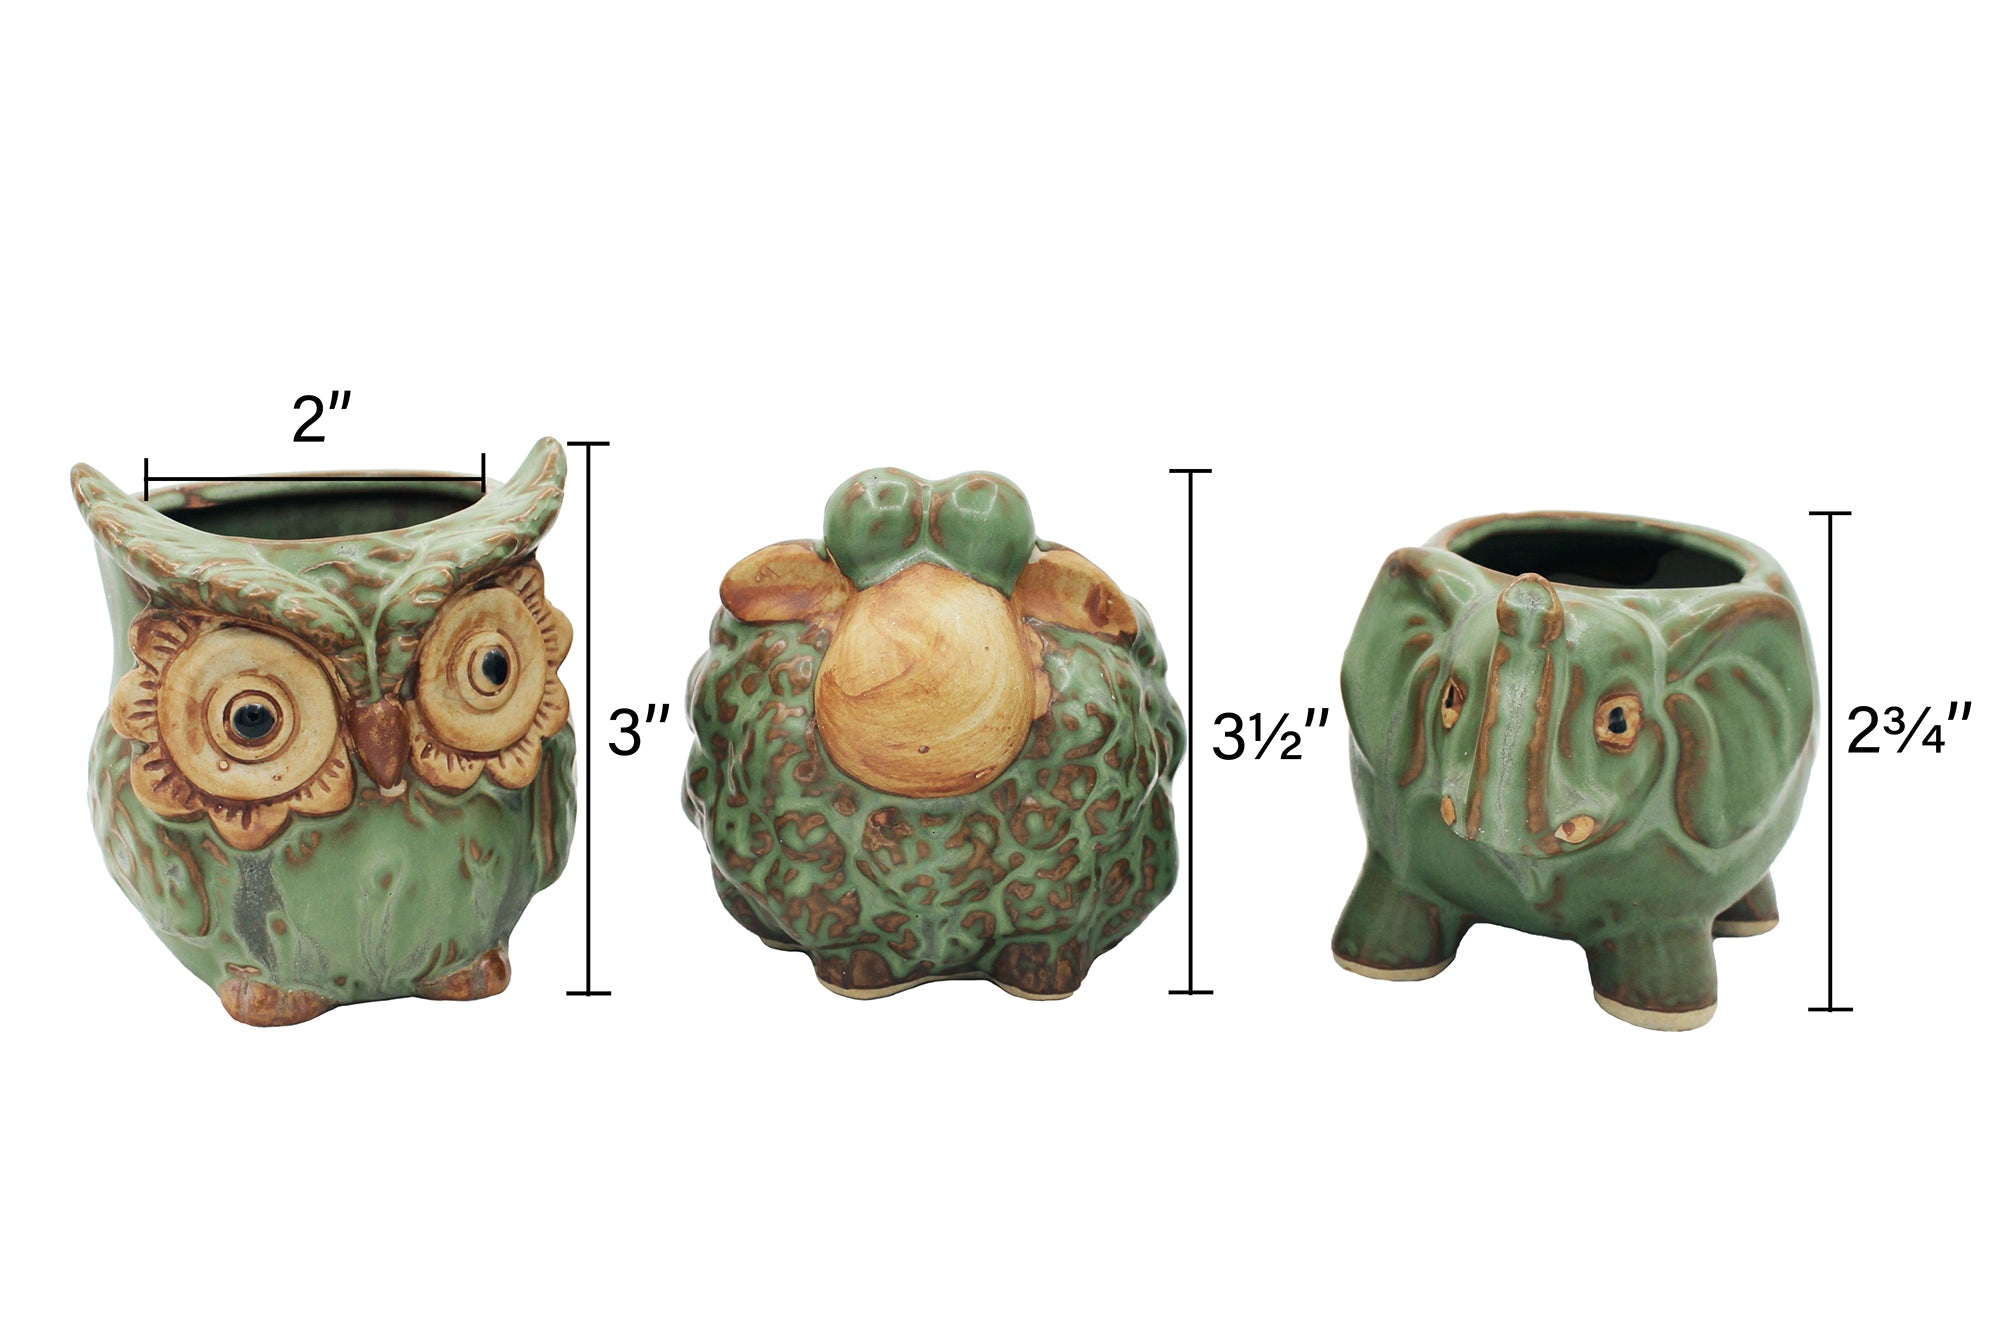 Cute Animal Succulent Planter Pots 3 Pack Sheep Planter Elephant Pot Owl Planter with Drainage Hole for 2" Small Plants